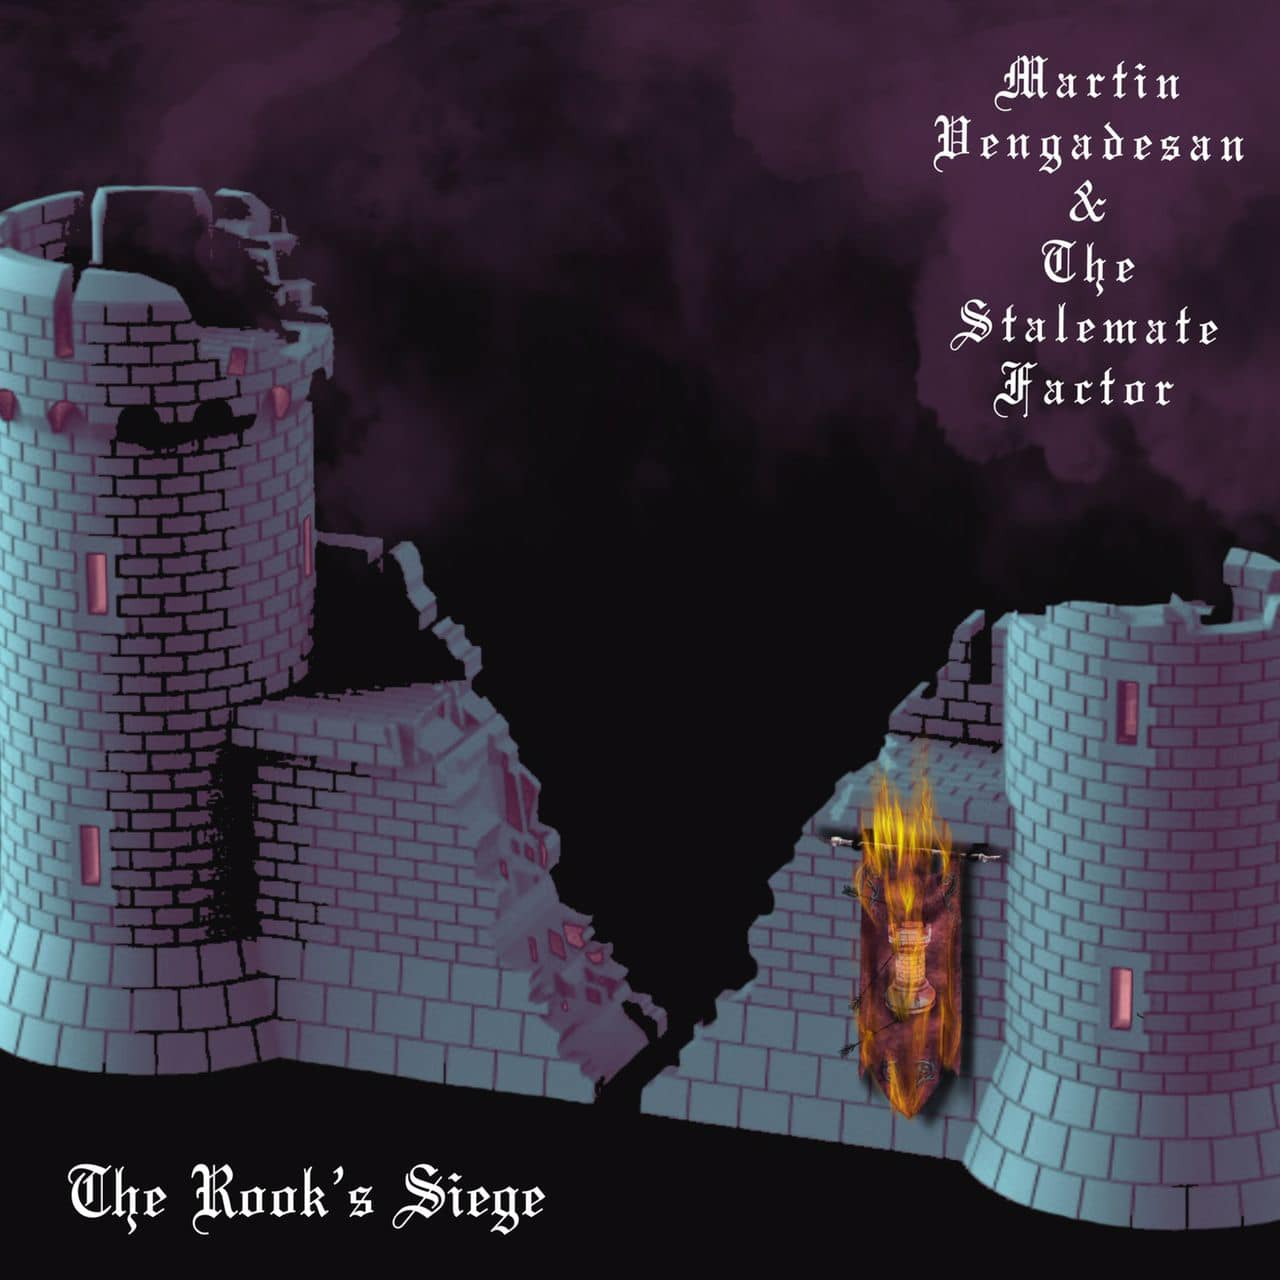 The Rook's Siege - MARTIN VENGADESAN AND THE STALEMATE FACTOR